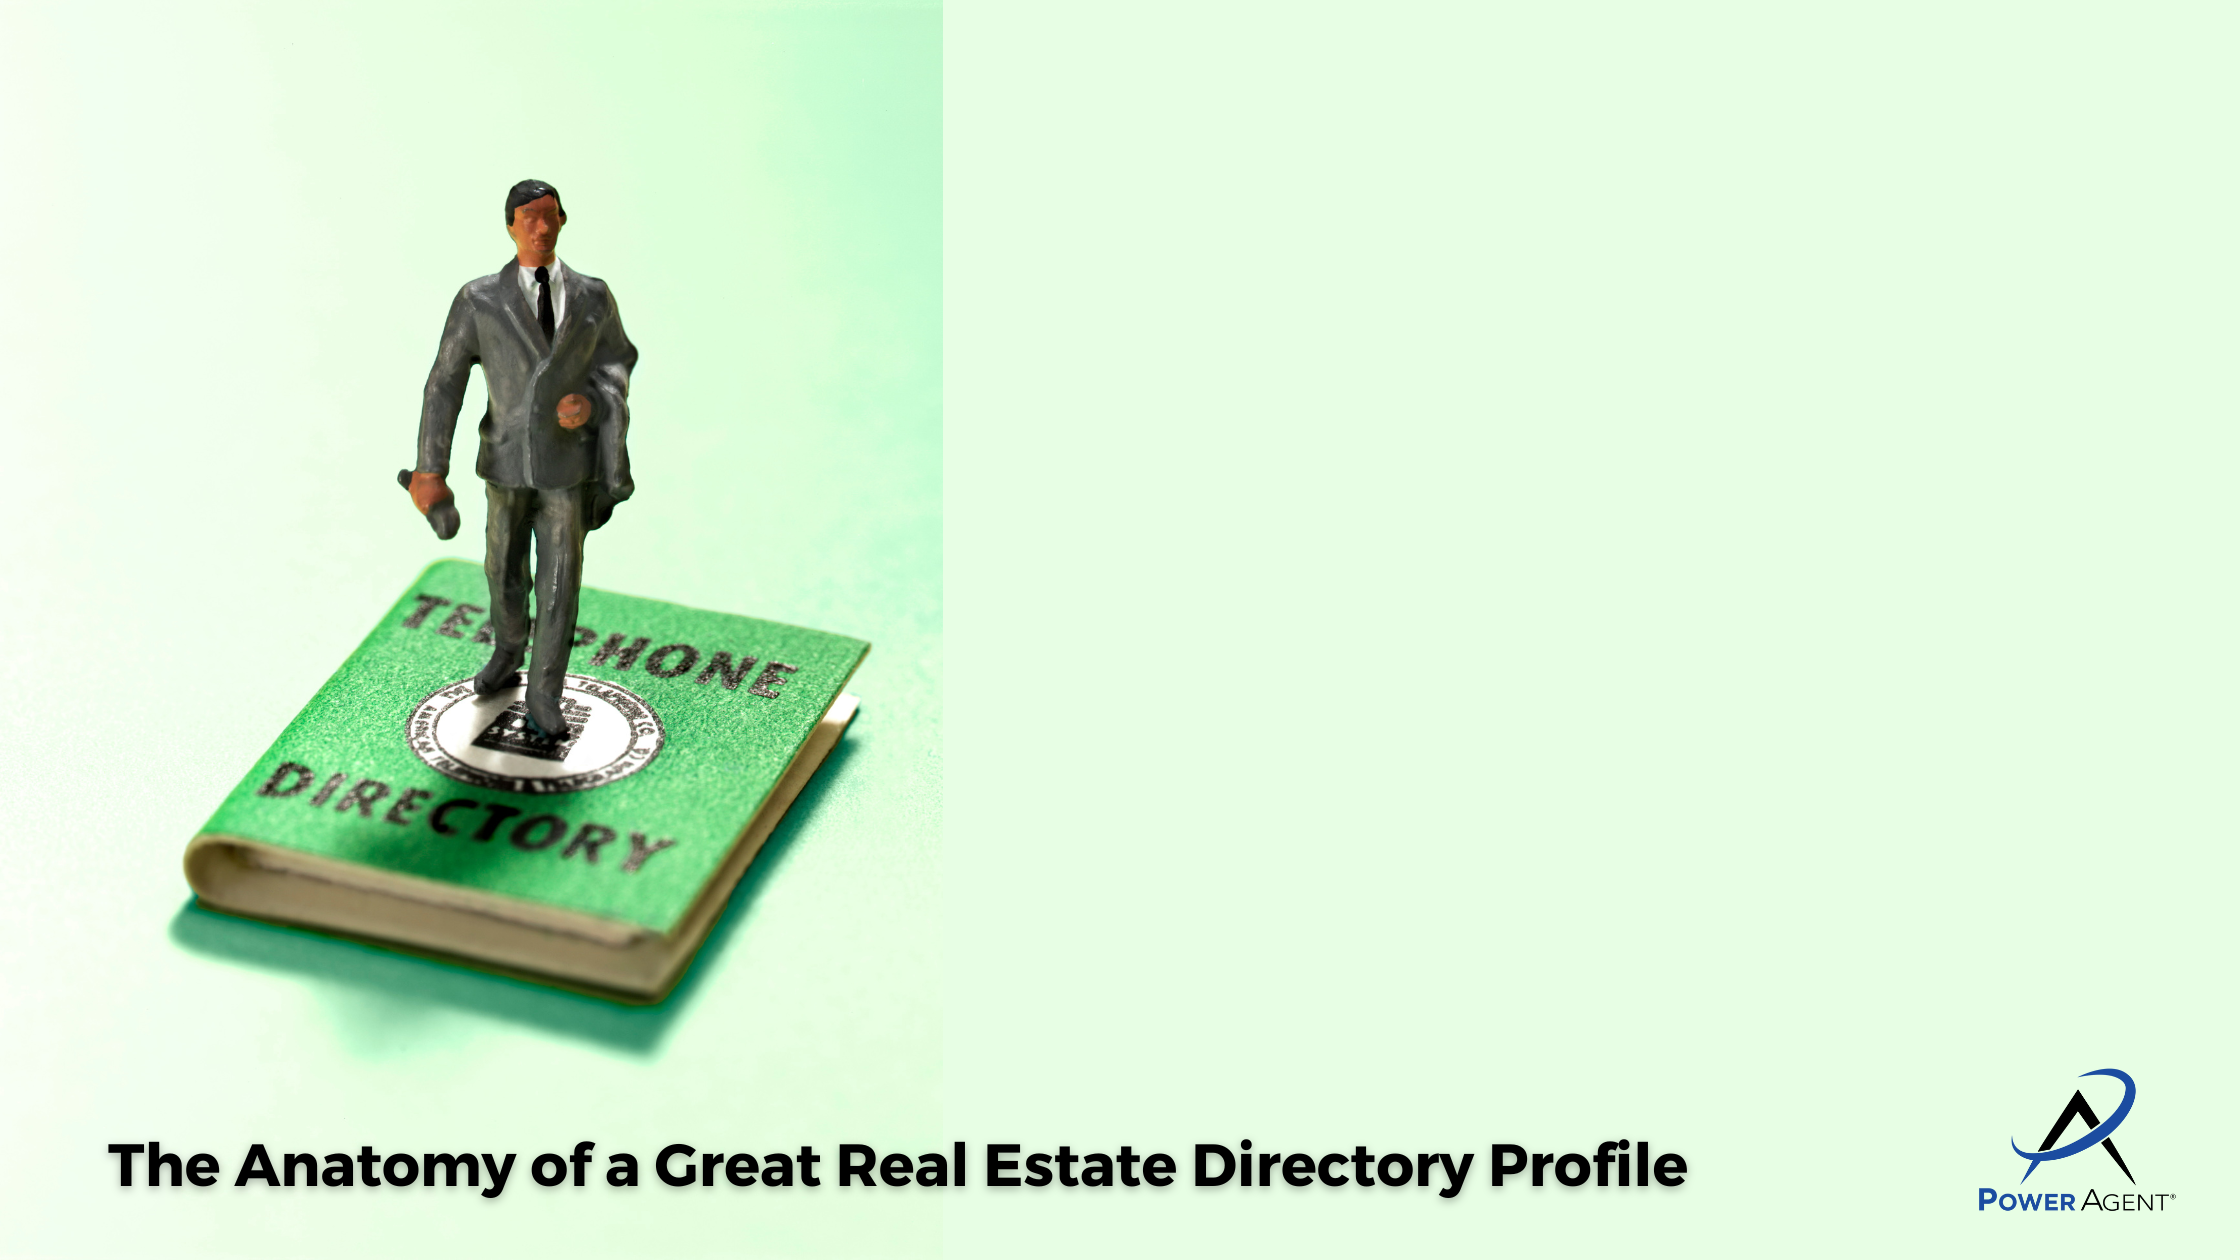 The Anatomy of a Great Real Estate Directory Profile